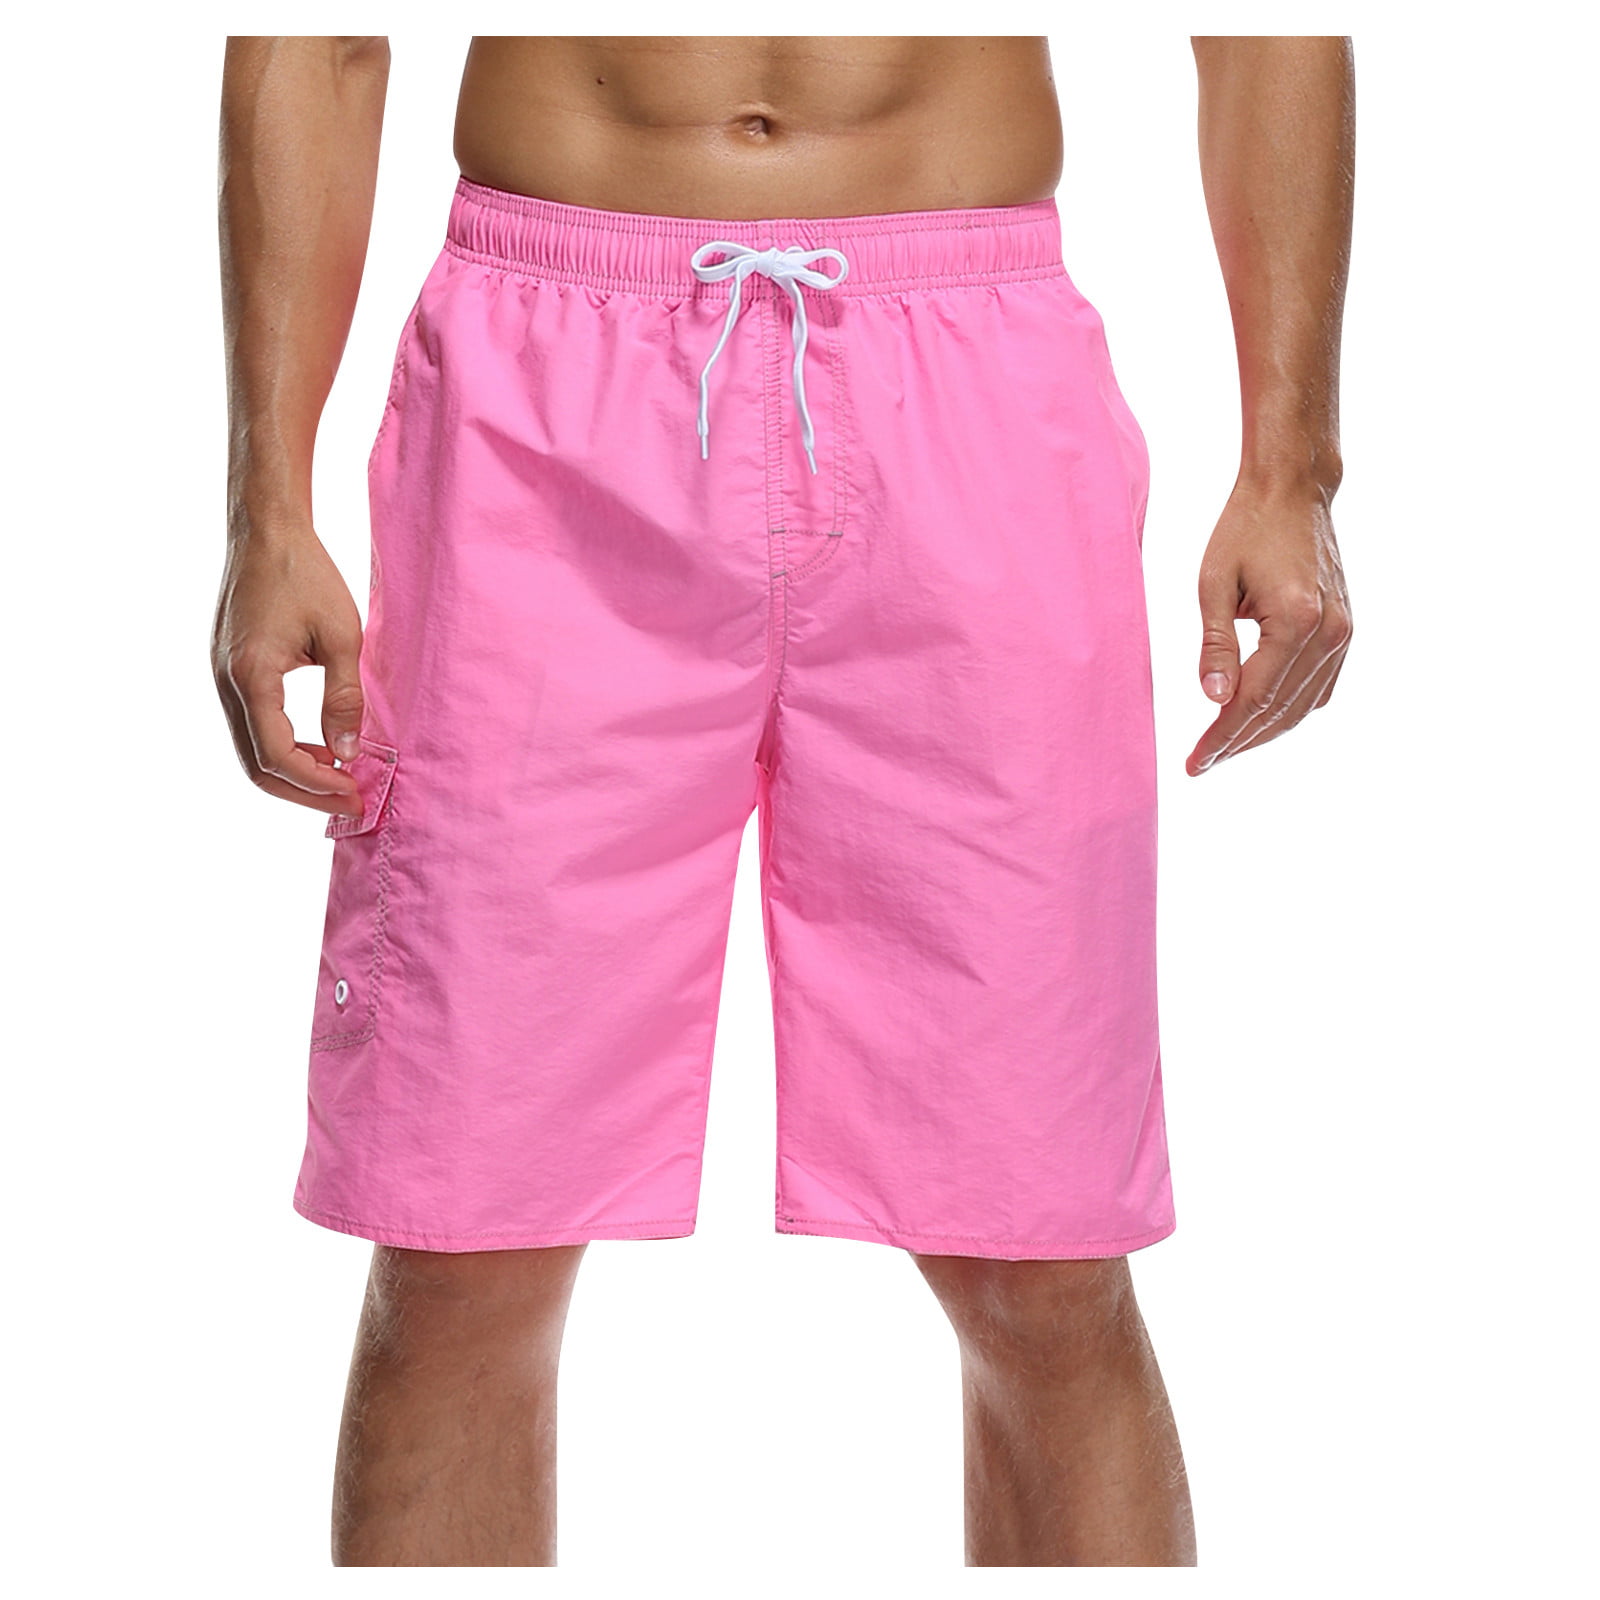 Mens Solid Shorts Patchwork Classic Trunks Casual Drawstring Elastic Pockets Shorts Surfing Running Pants Size M-3XL 